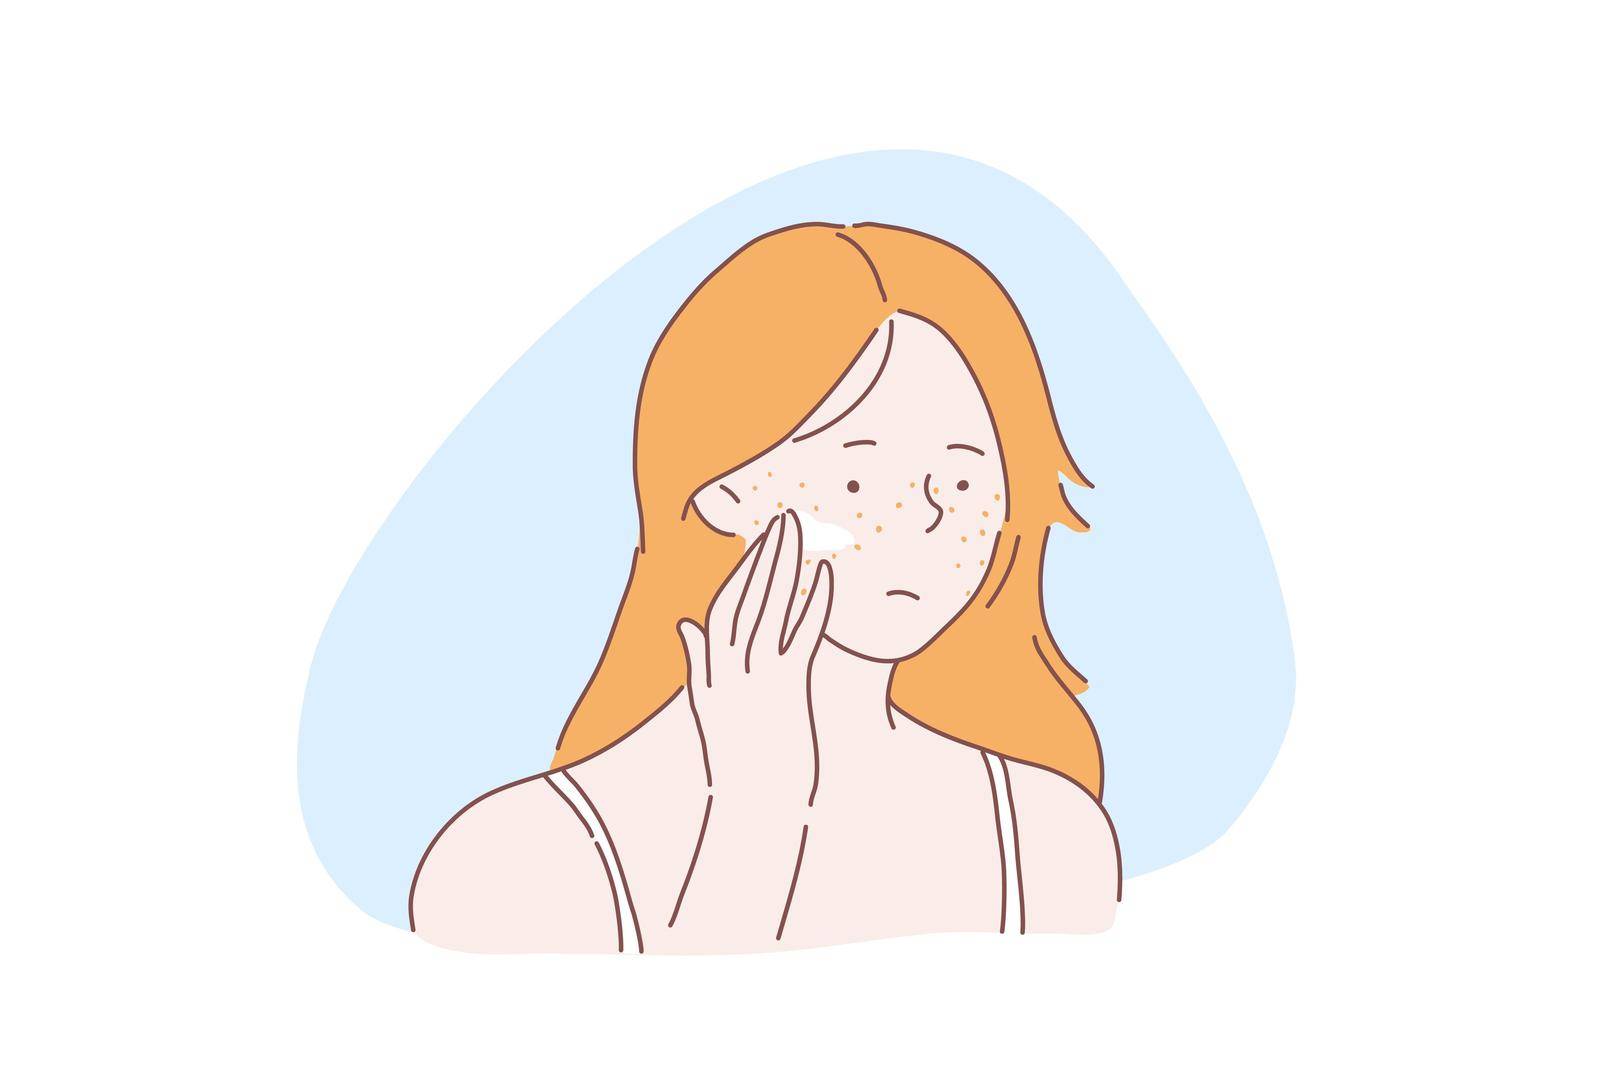 Teenage girl skincare problem concept. Woman with facial rash, lady applies cream, ointment on skin with acne pimples, covers freckles with foundation base, concealer. Simple flat vector